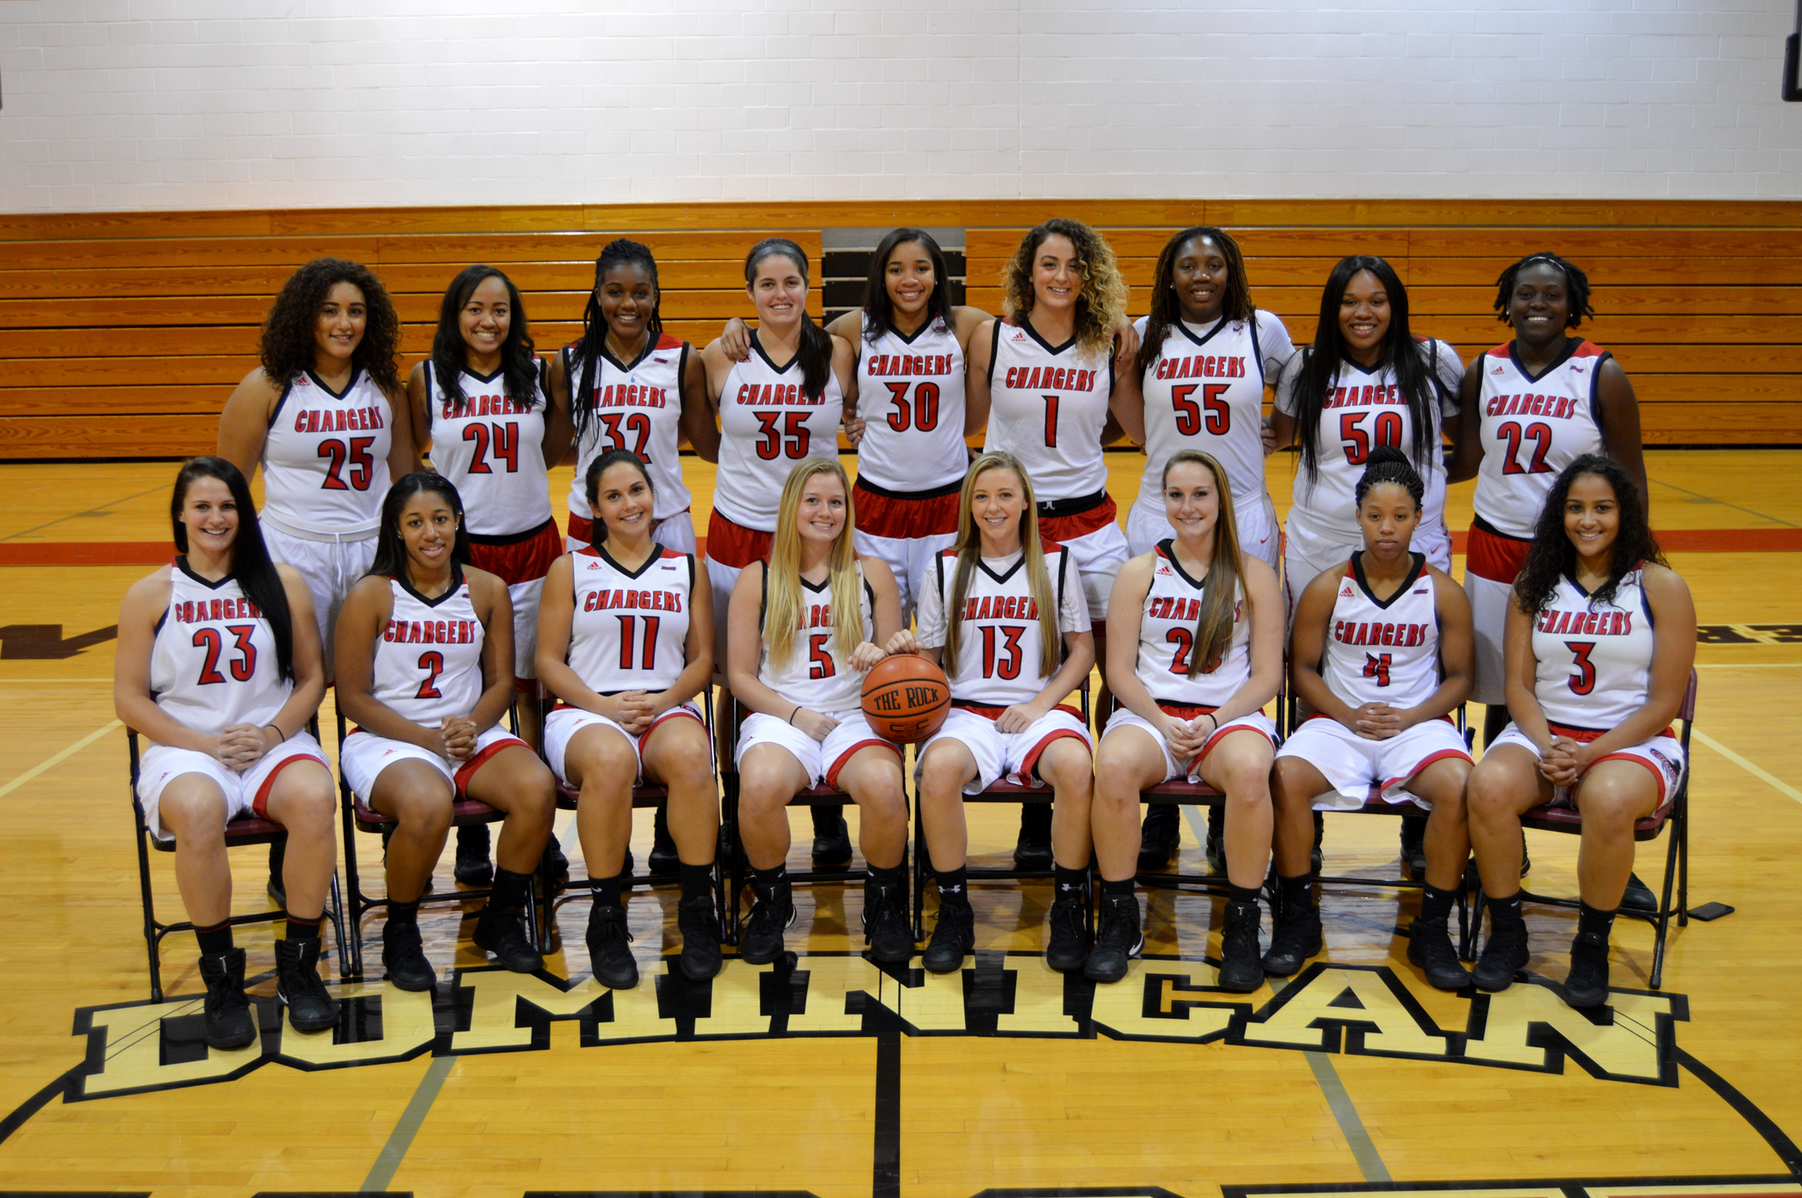 LADY CHARGERS LOSE TO ST. THOMAS AQUINAS COLLEGE